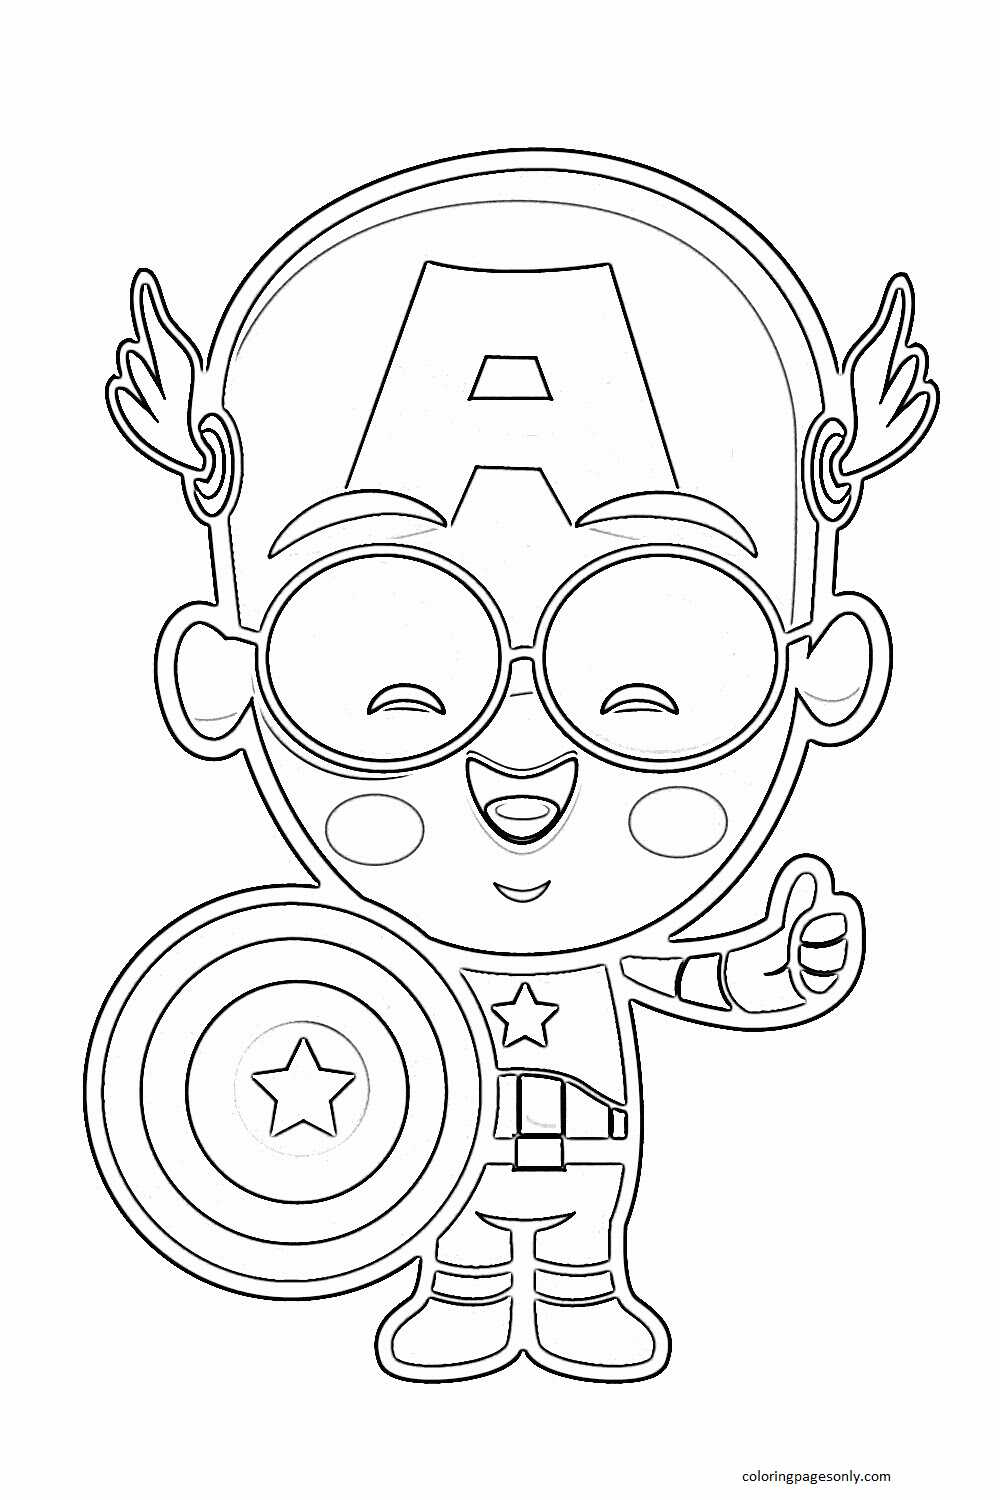 Cartoon Avengers Captain America Coloring Page